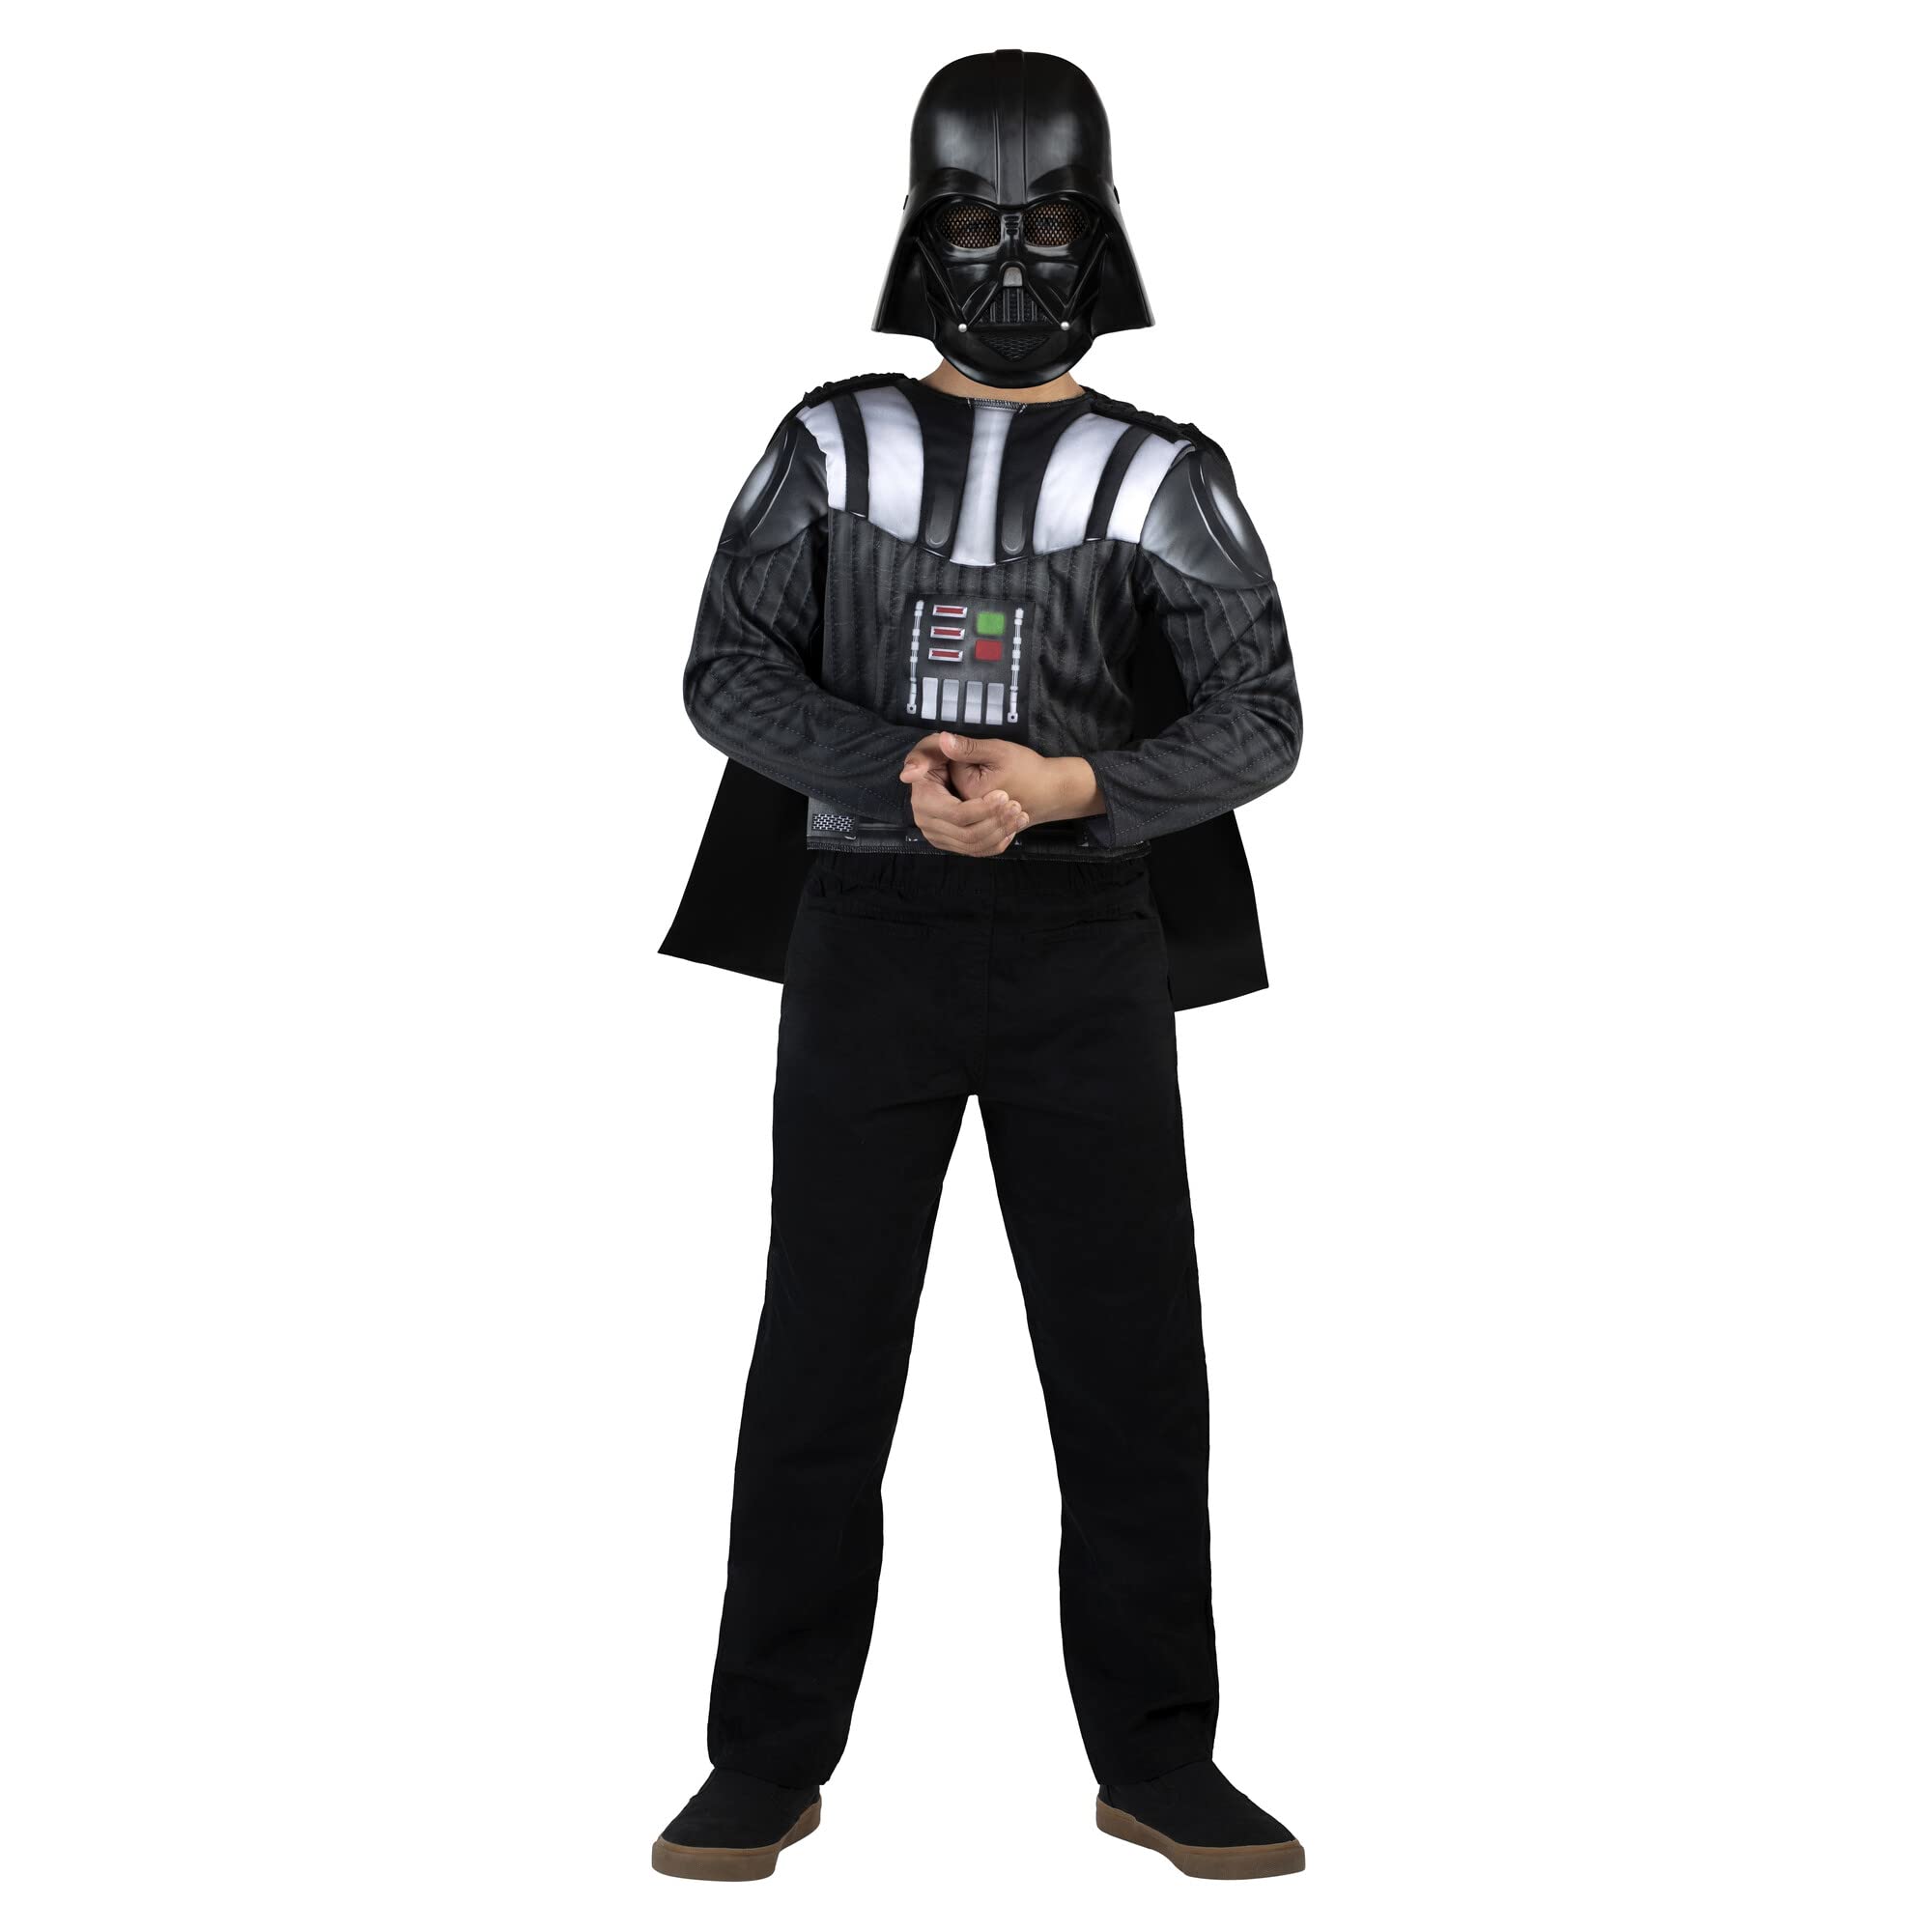 STAR WARS Darth Vader Youth Muscle Chest Box Set - Padded Costume Top and Cape with Plastic Mask